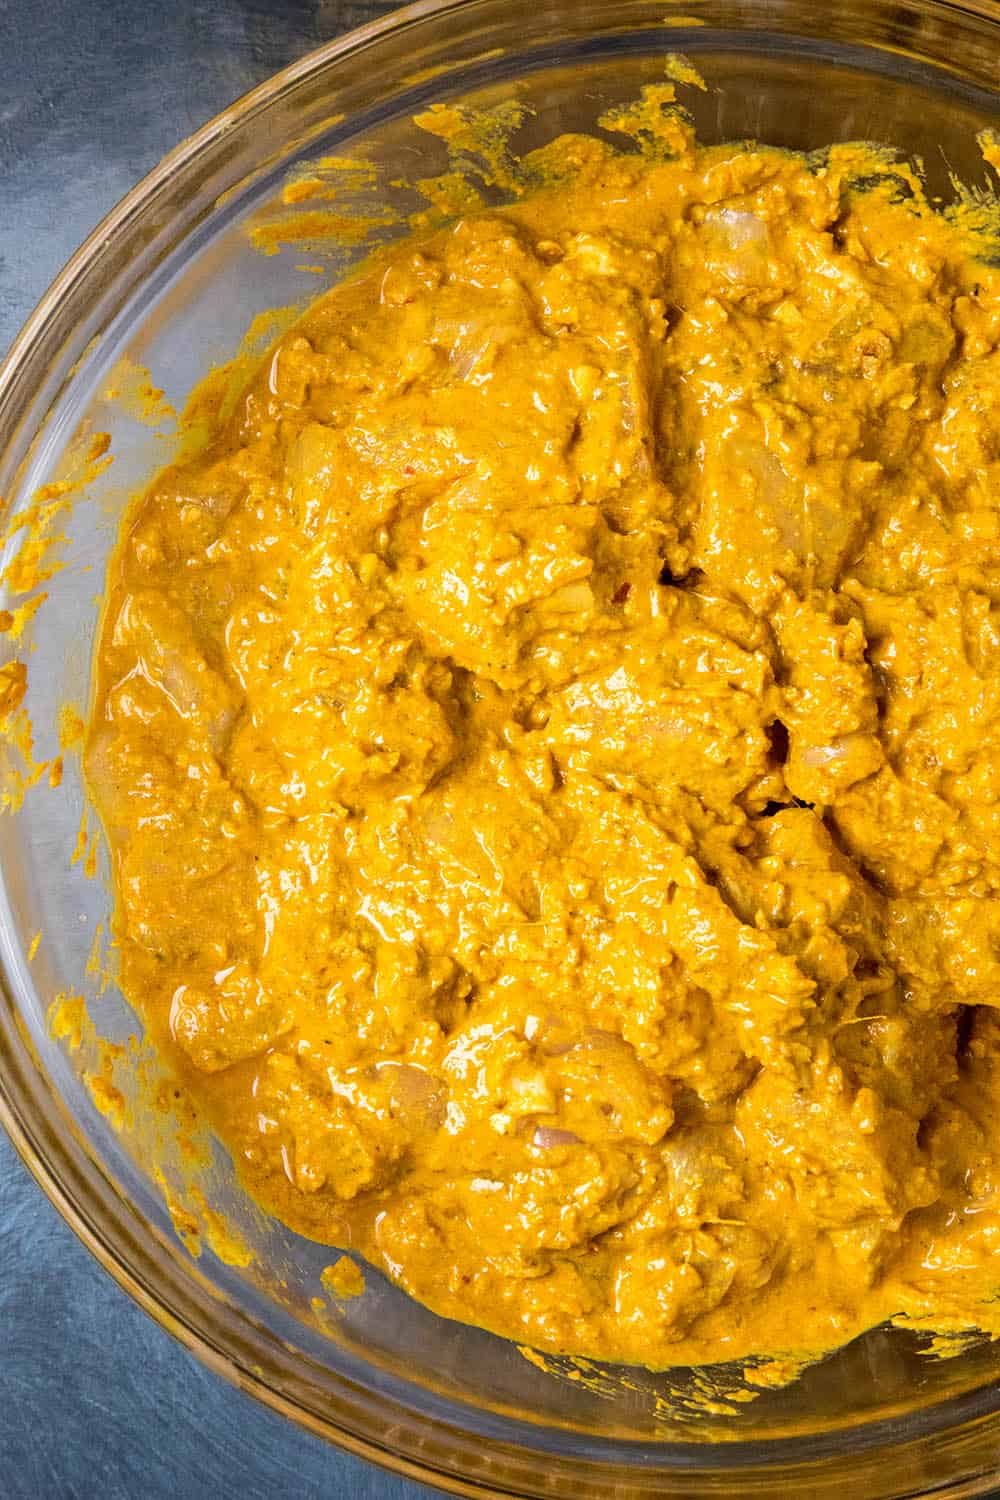 Chicken added to the Korma marinade